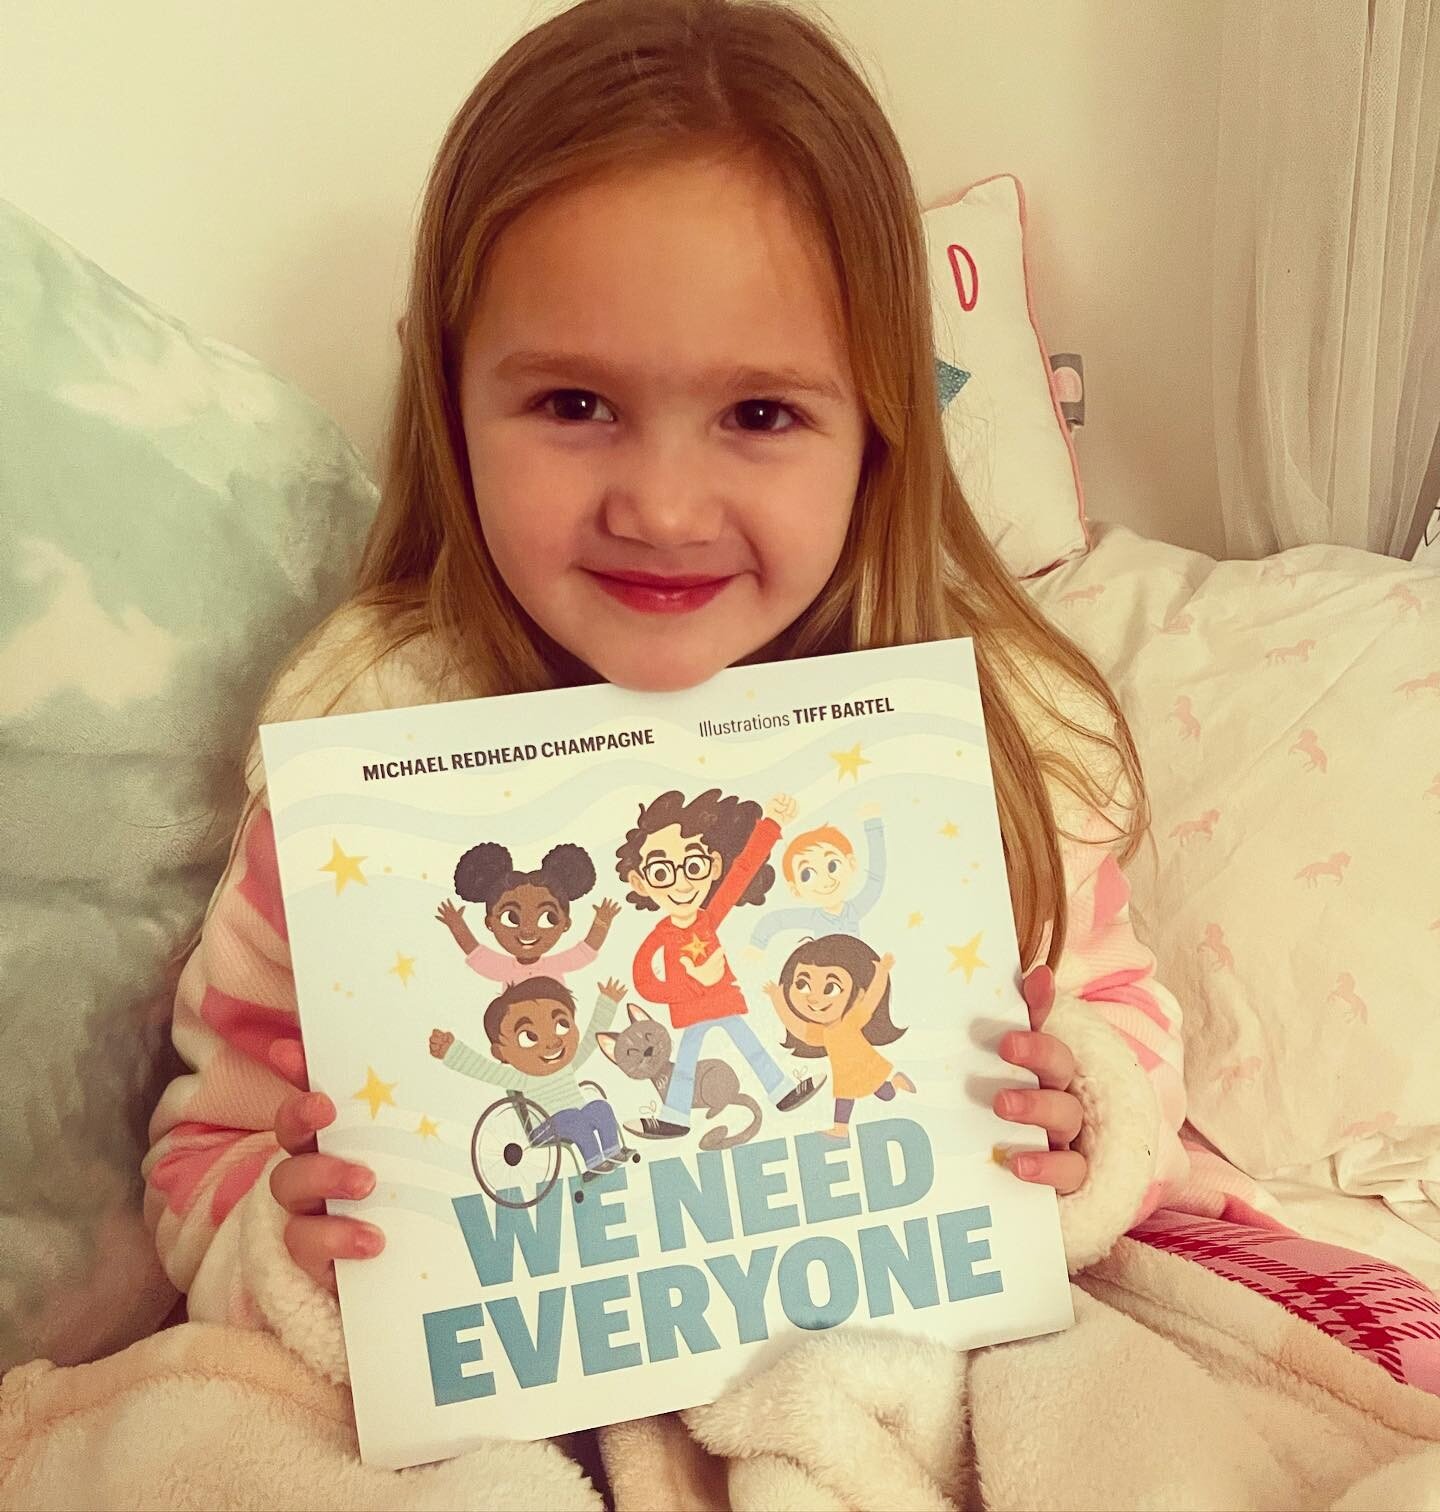 Hudsie and I are so excited to tell you about @northendmc&rsquo;s new book, illustrated by @tiffbartel! &quot;We Need Everyone&quot; is the debut book by emerging author and community champion, @northendmc! 

Available September 2022, this illustrate